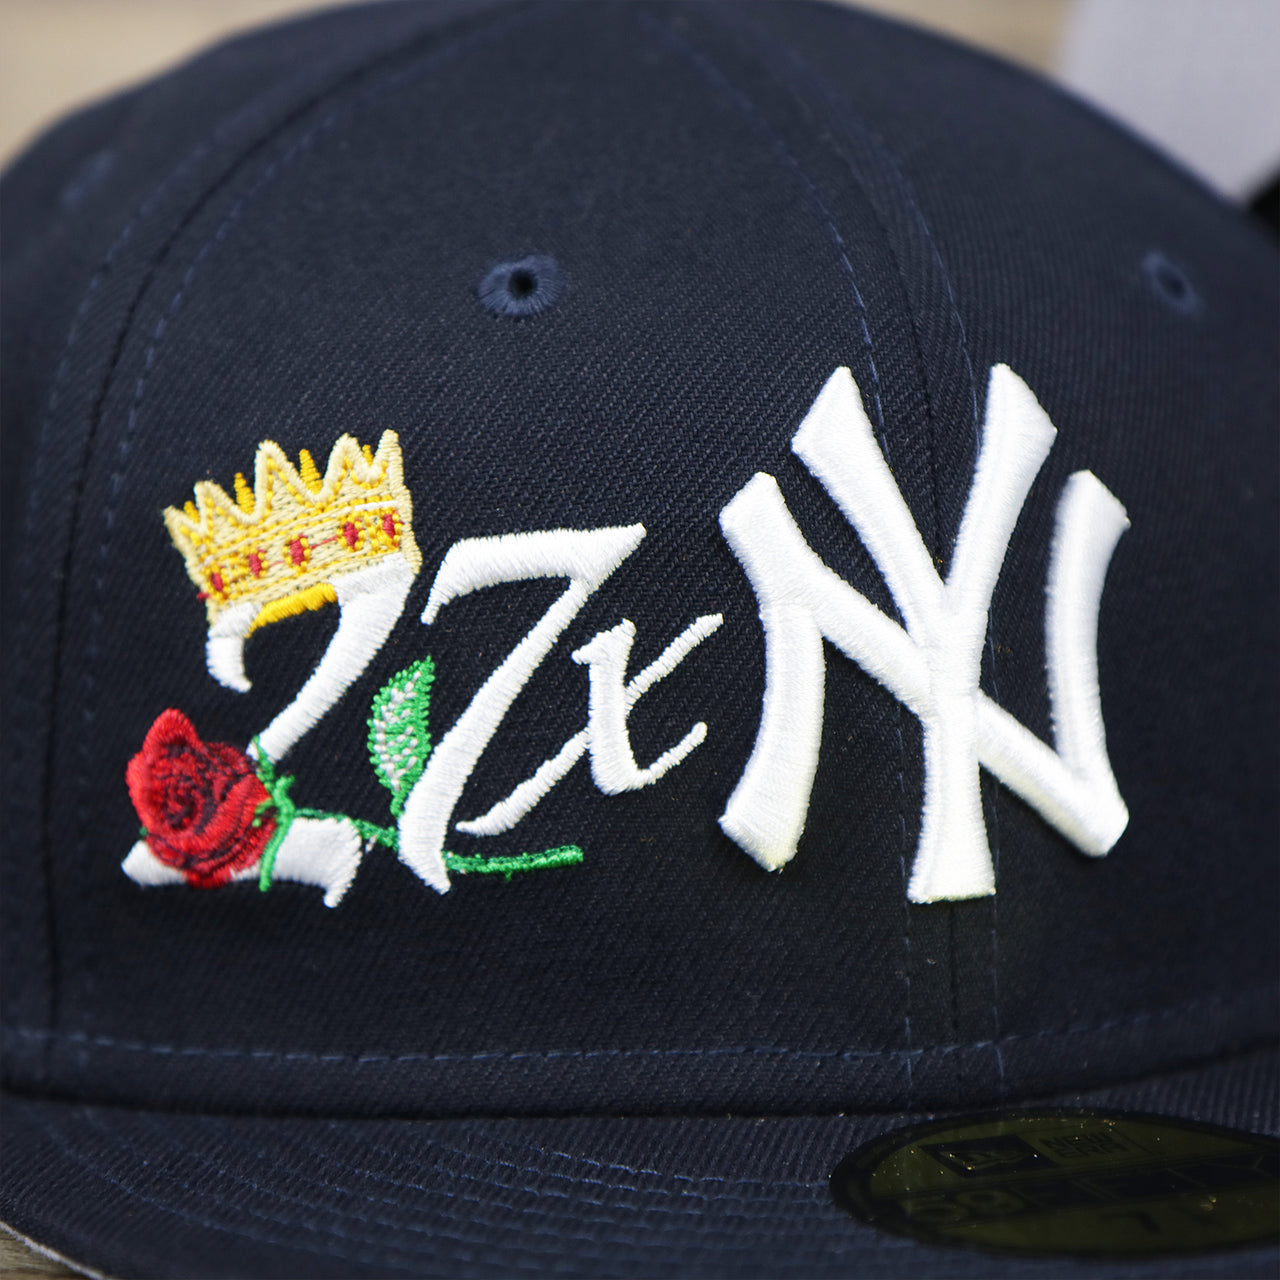 The Yankees Crown Champs logo on the New York Yankees Crown Champions Gray Bottom World Championship Wins Embroidered Fitted Cap | Navy Blue 59Fifty Cap